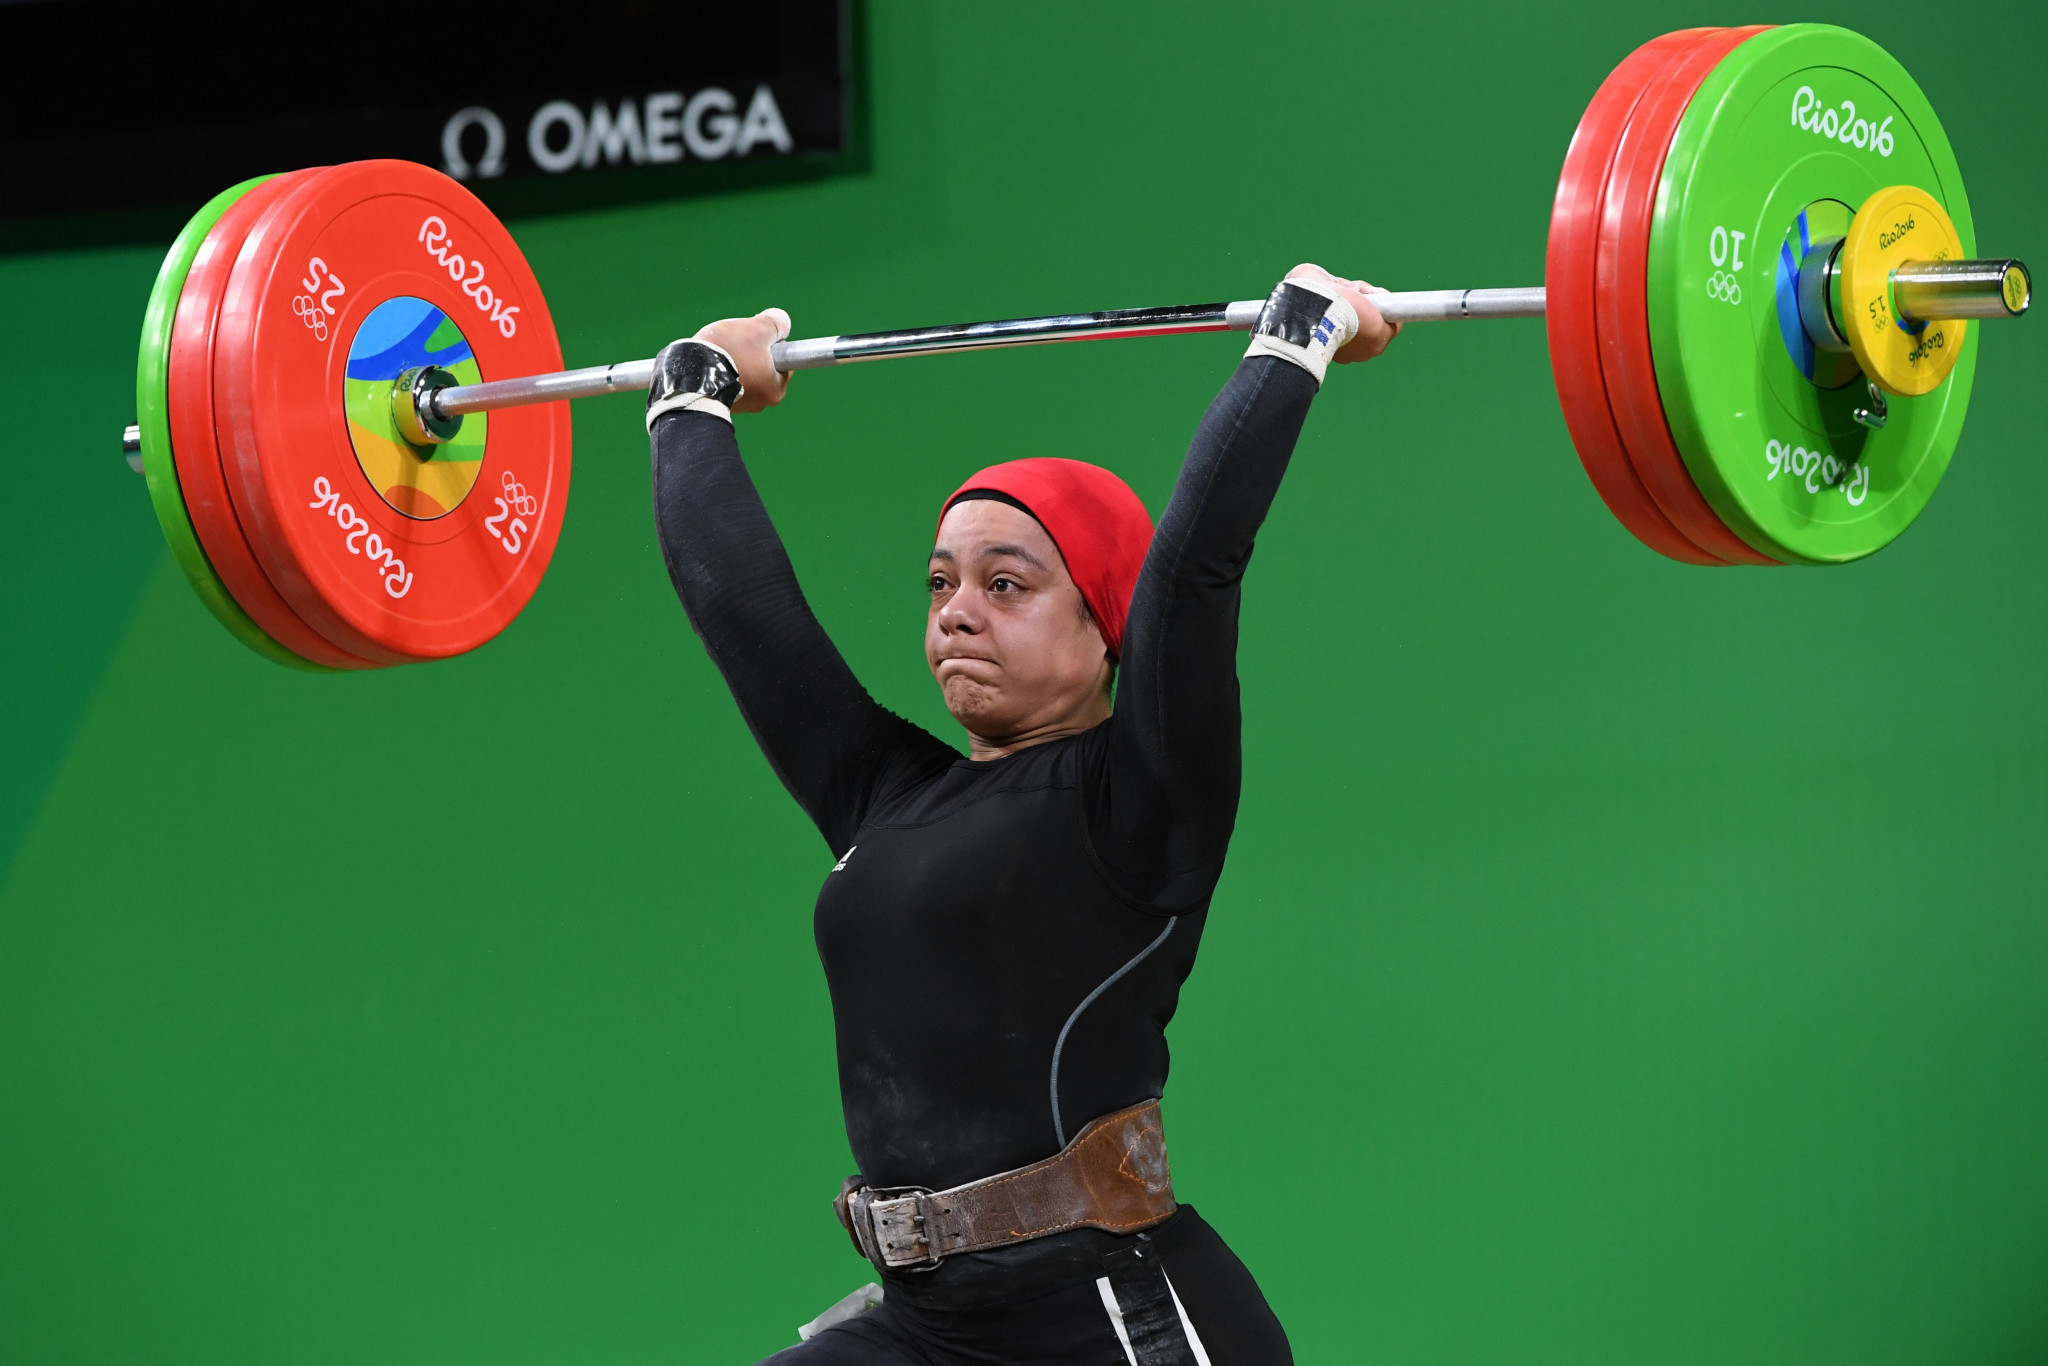 Egypt's Sara Ahmed is having to pay a heavy price for her country's doping ban ©Getty Images